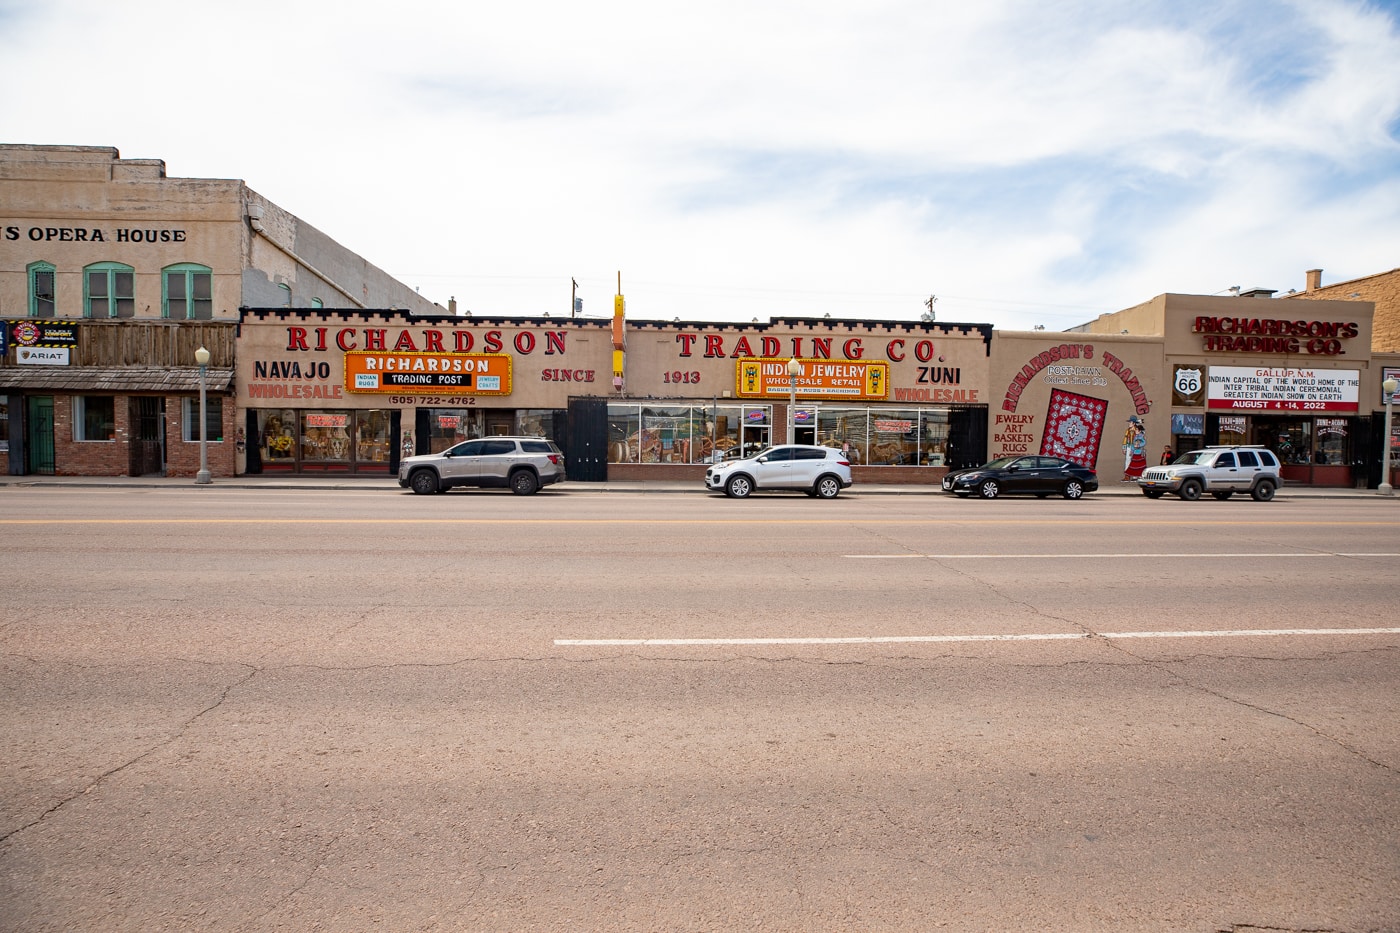 Richardson Trading Post in Gallup, New Mexico